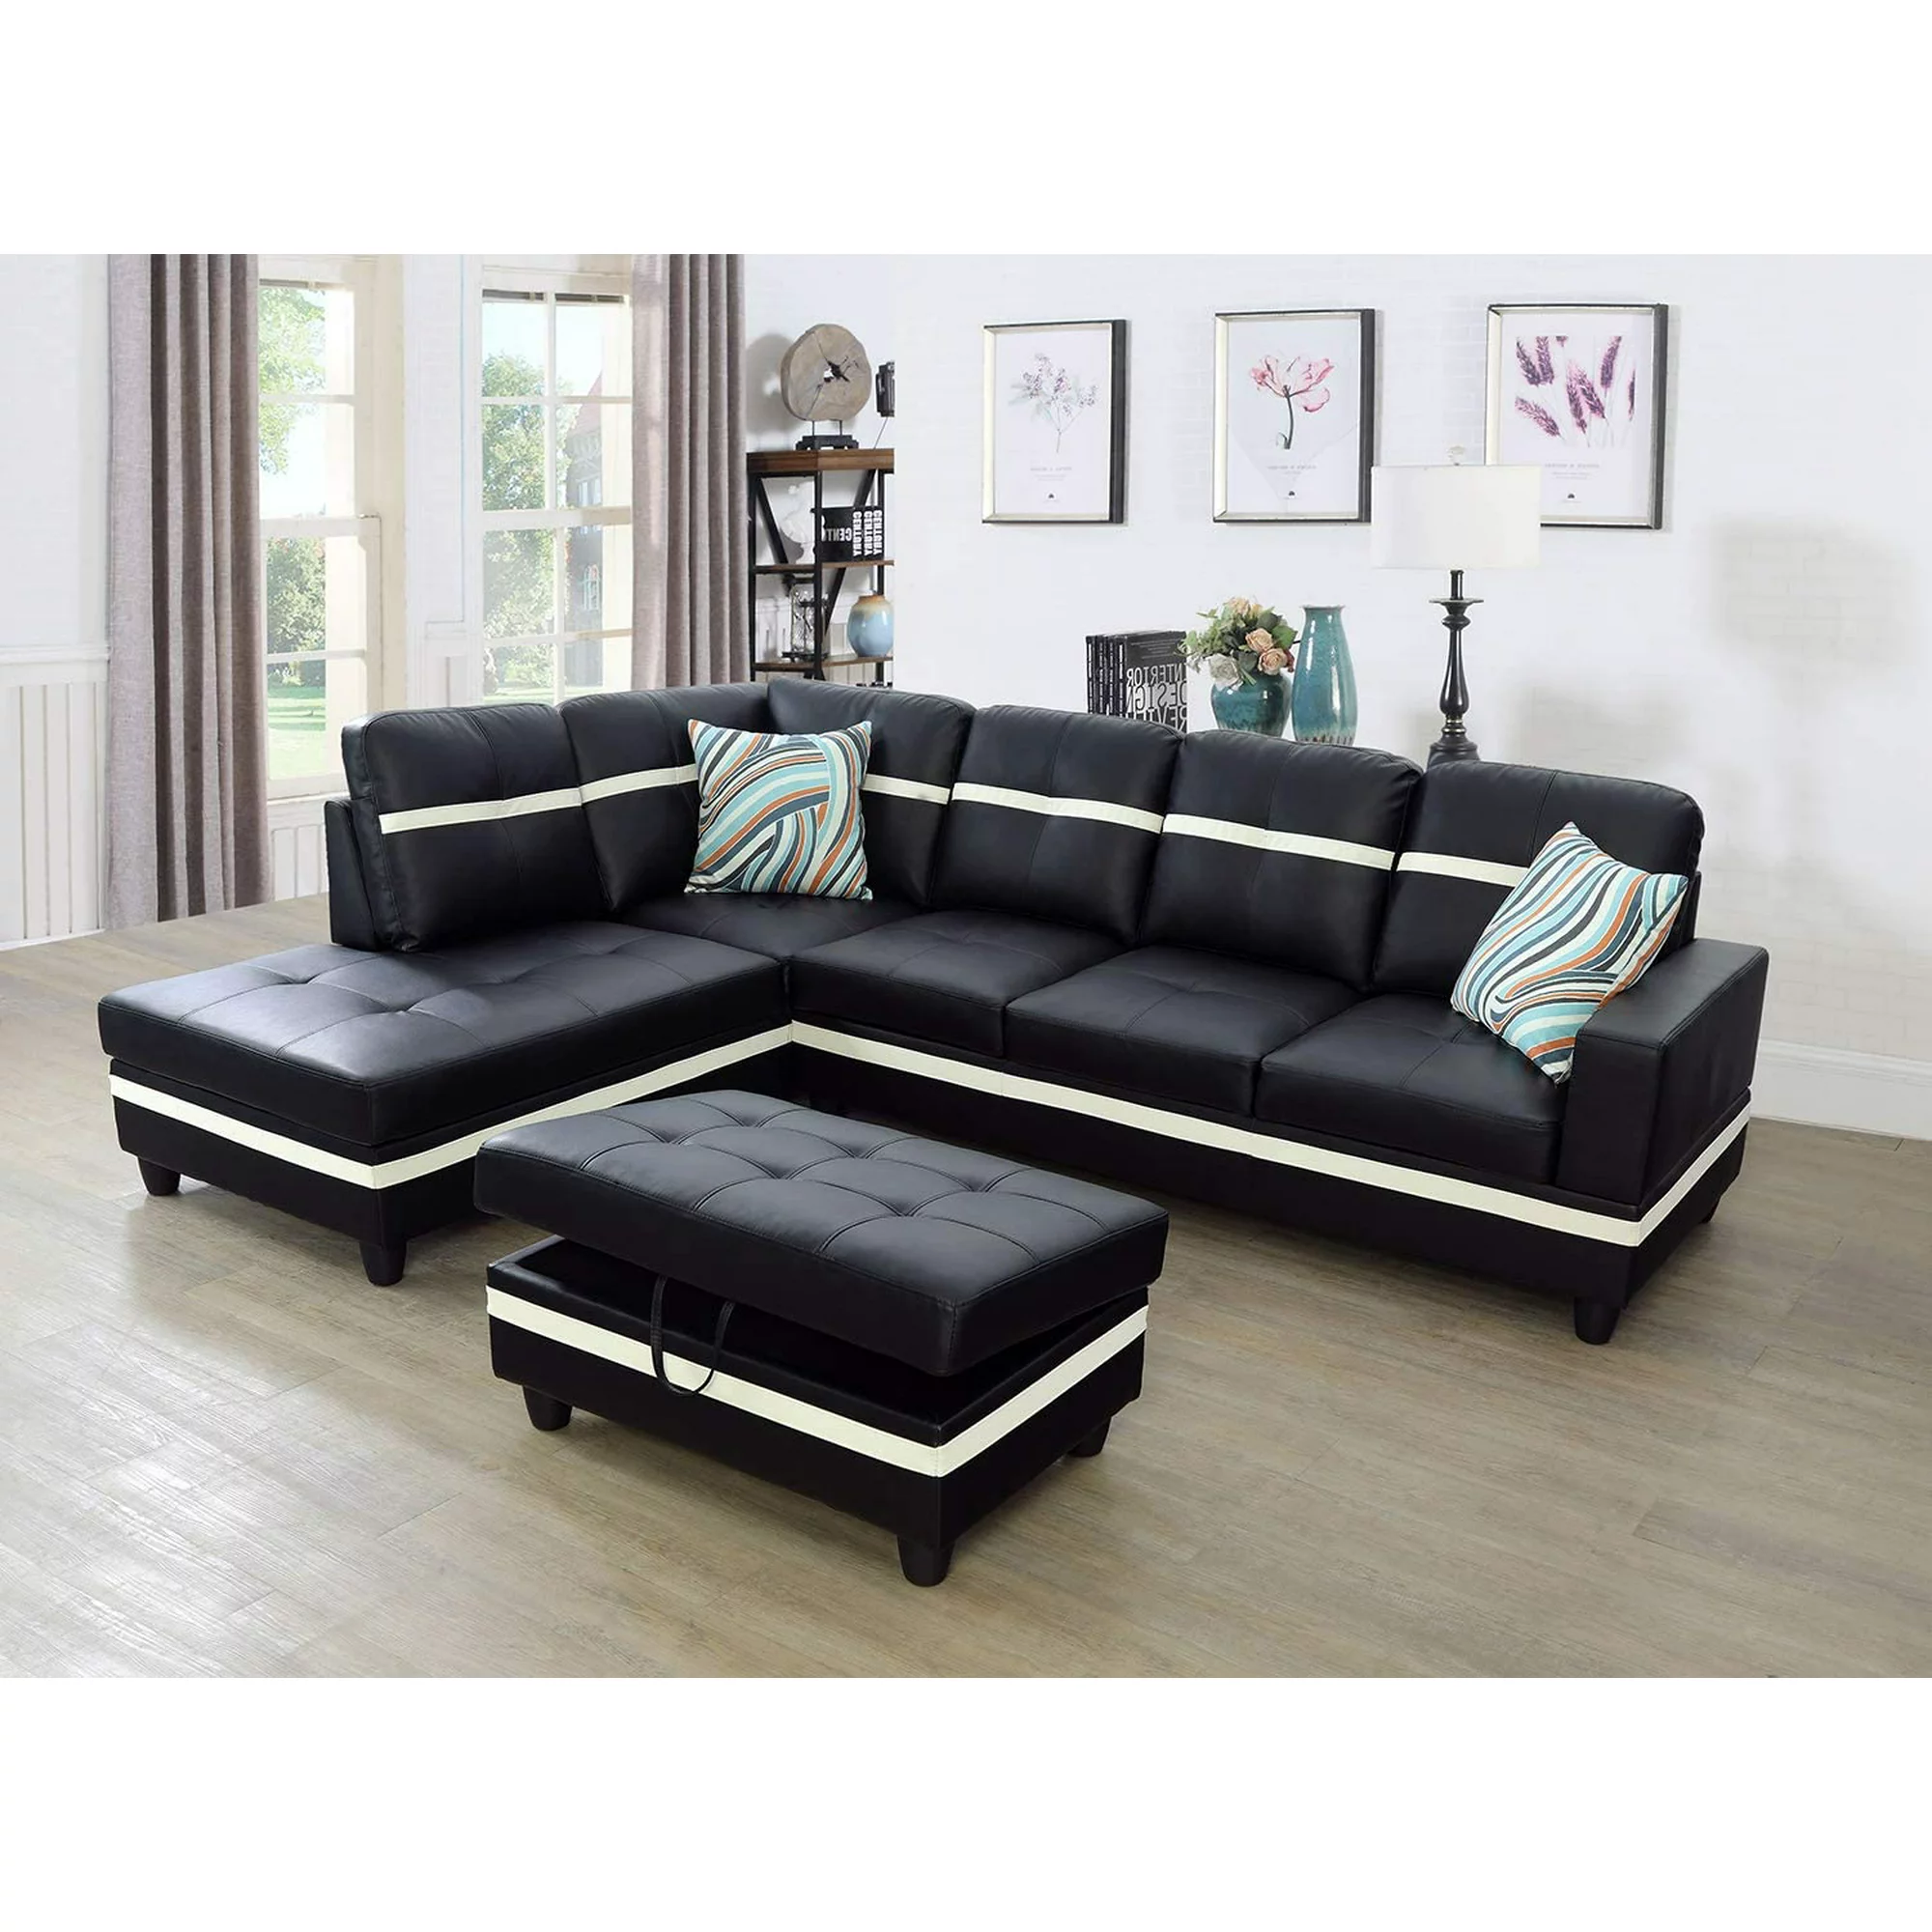 Ainehome Leather Sectional Shaped Living Room Sets